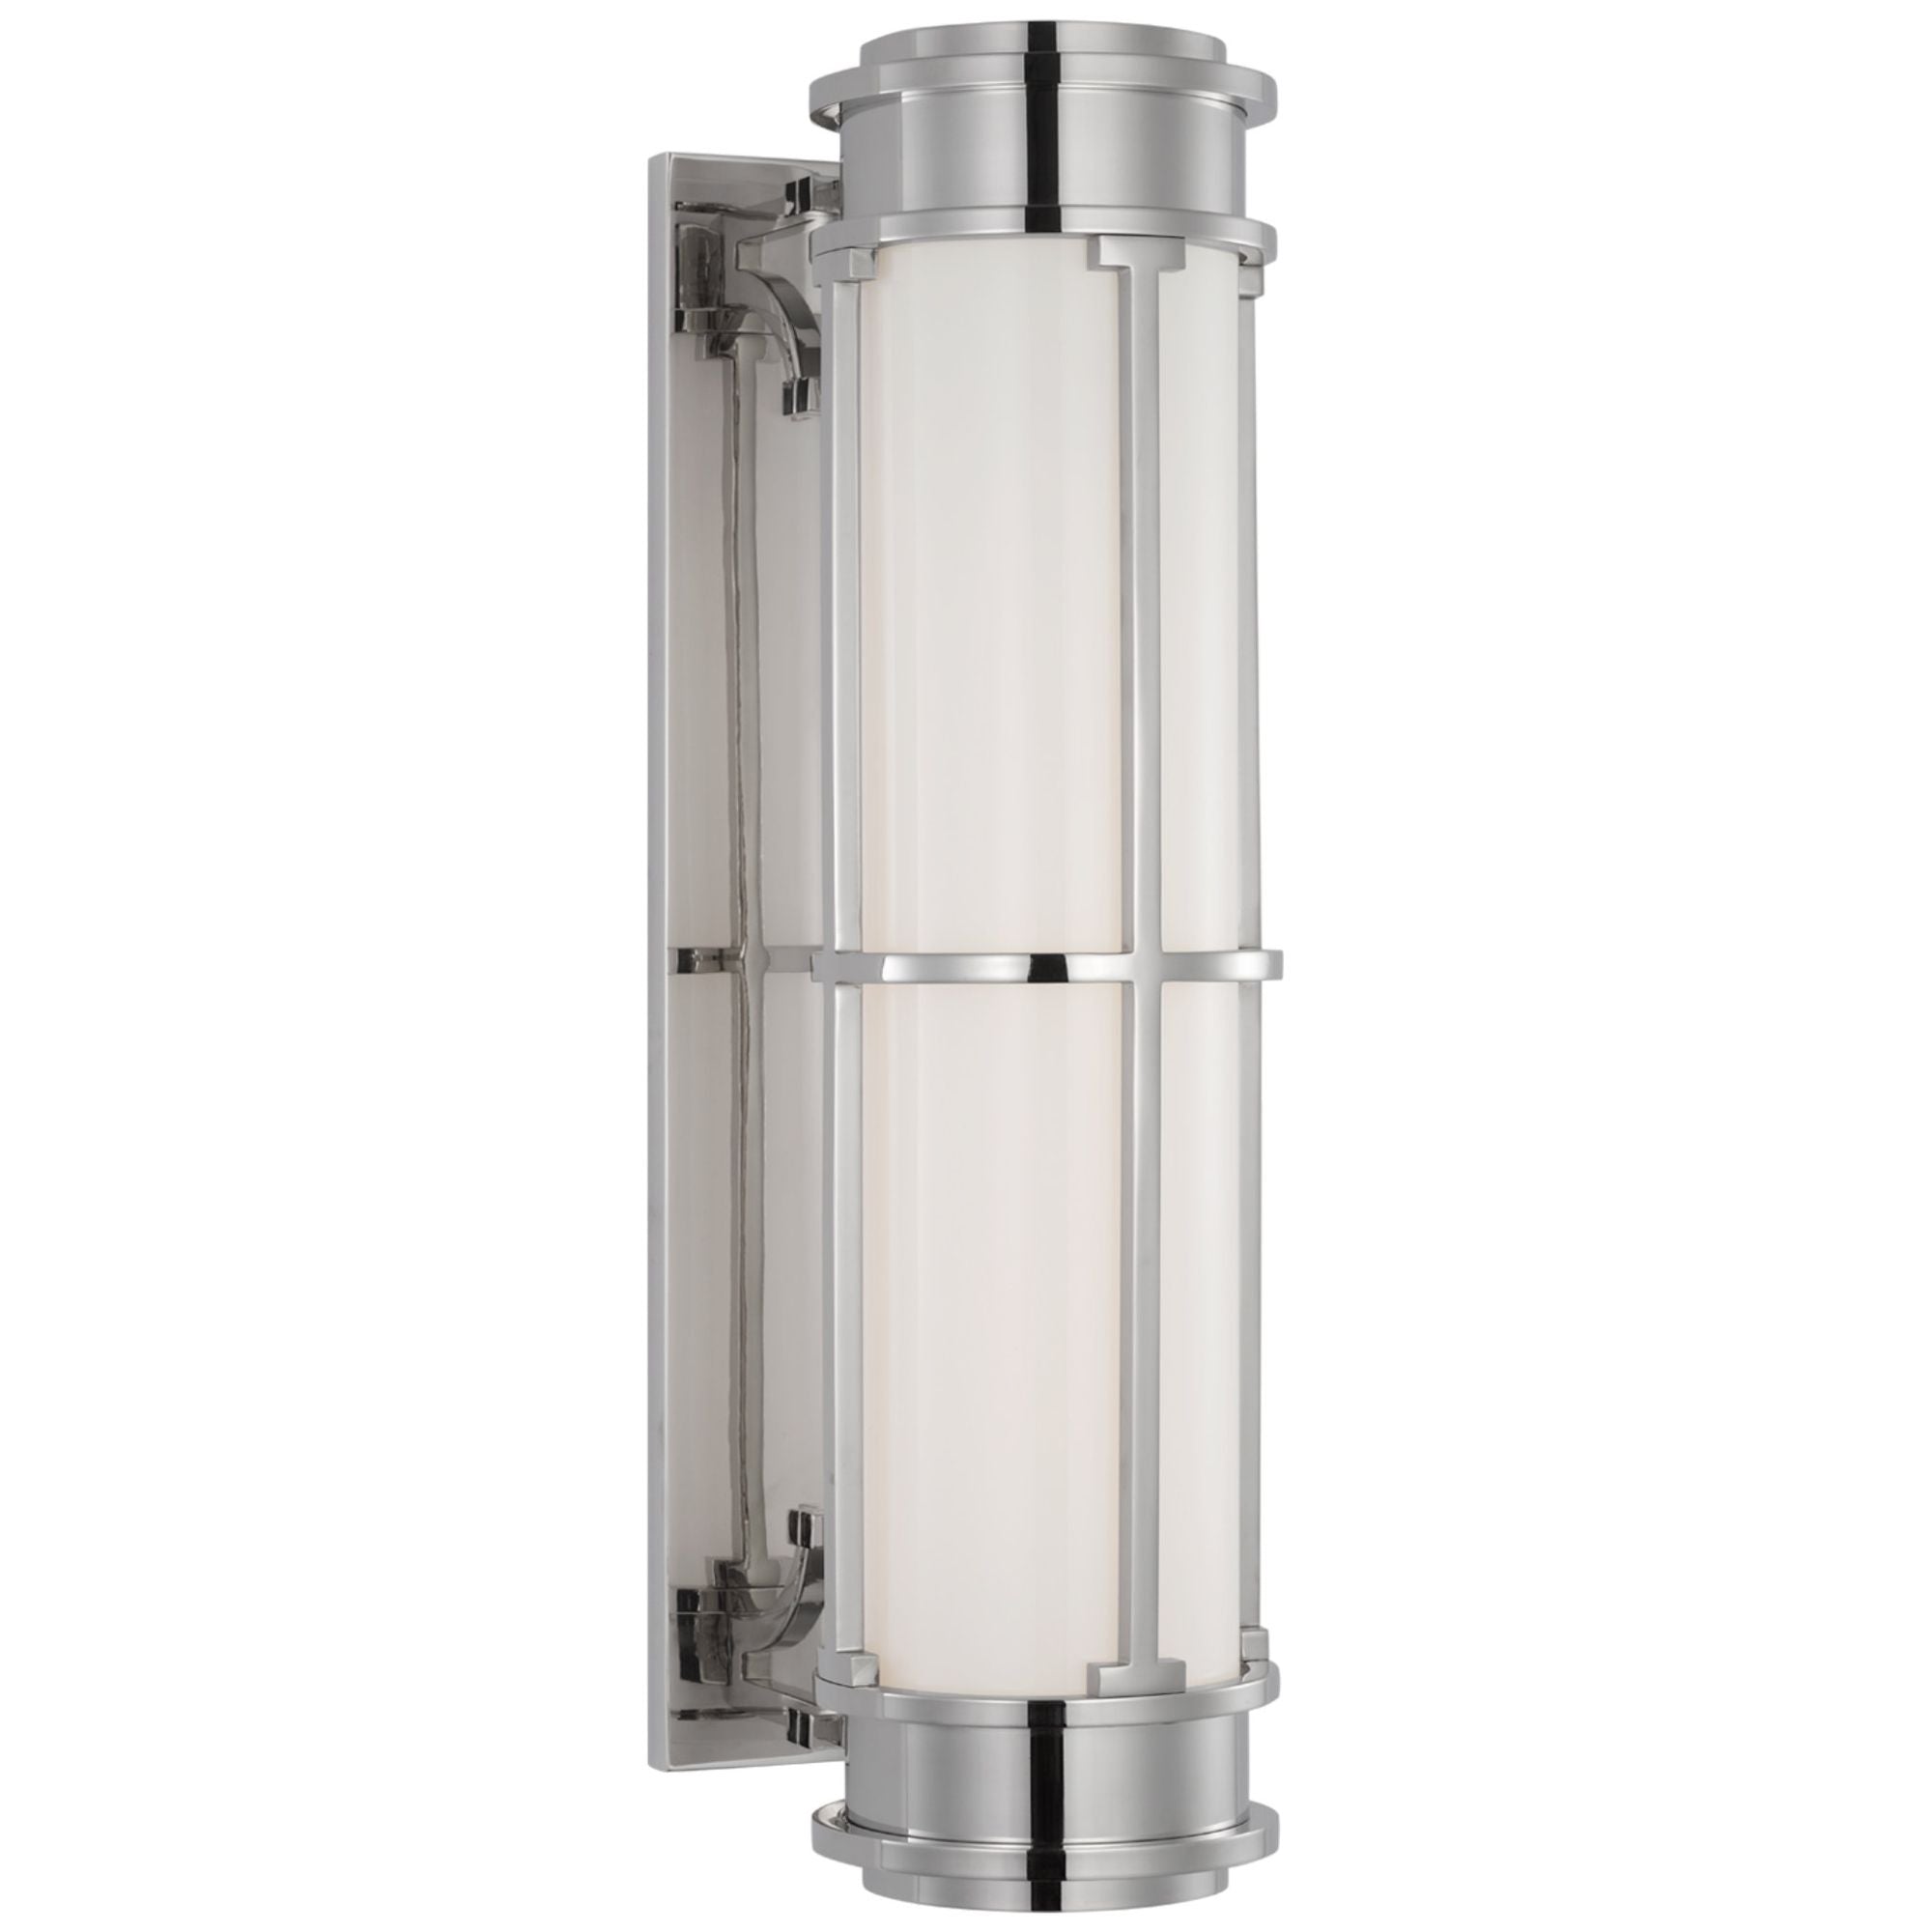 Chapman & Myers Gracie 19" Linear Sconce in Polished Nickel with White Glass